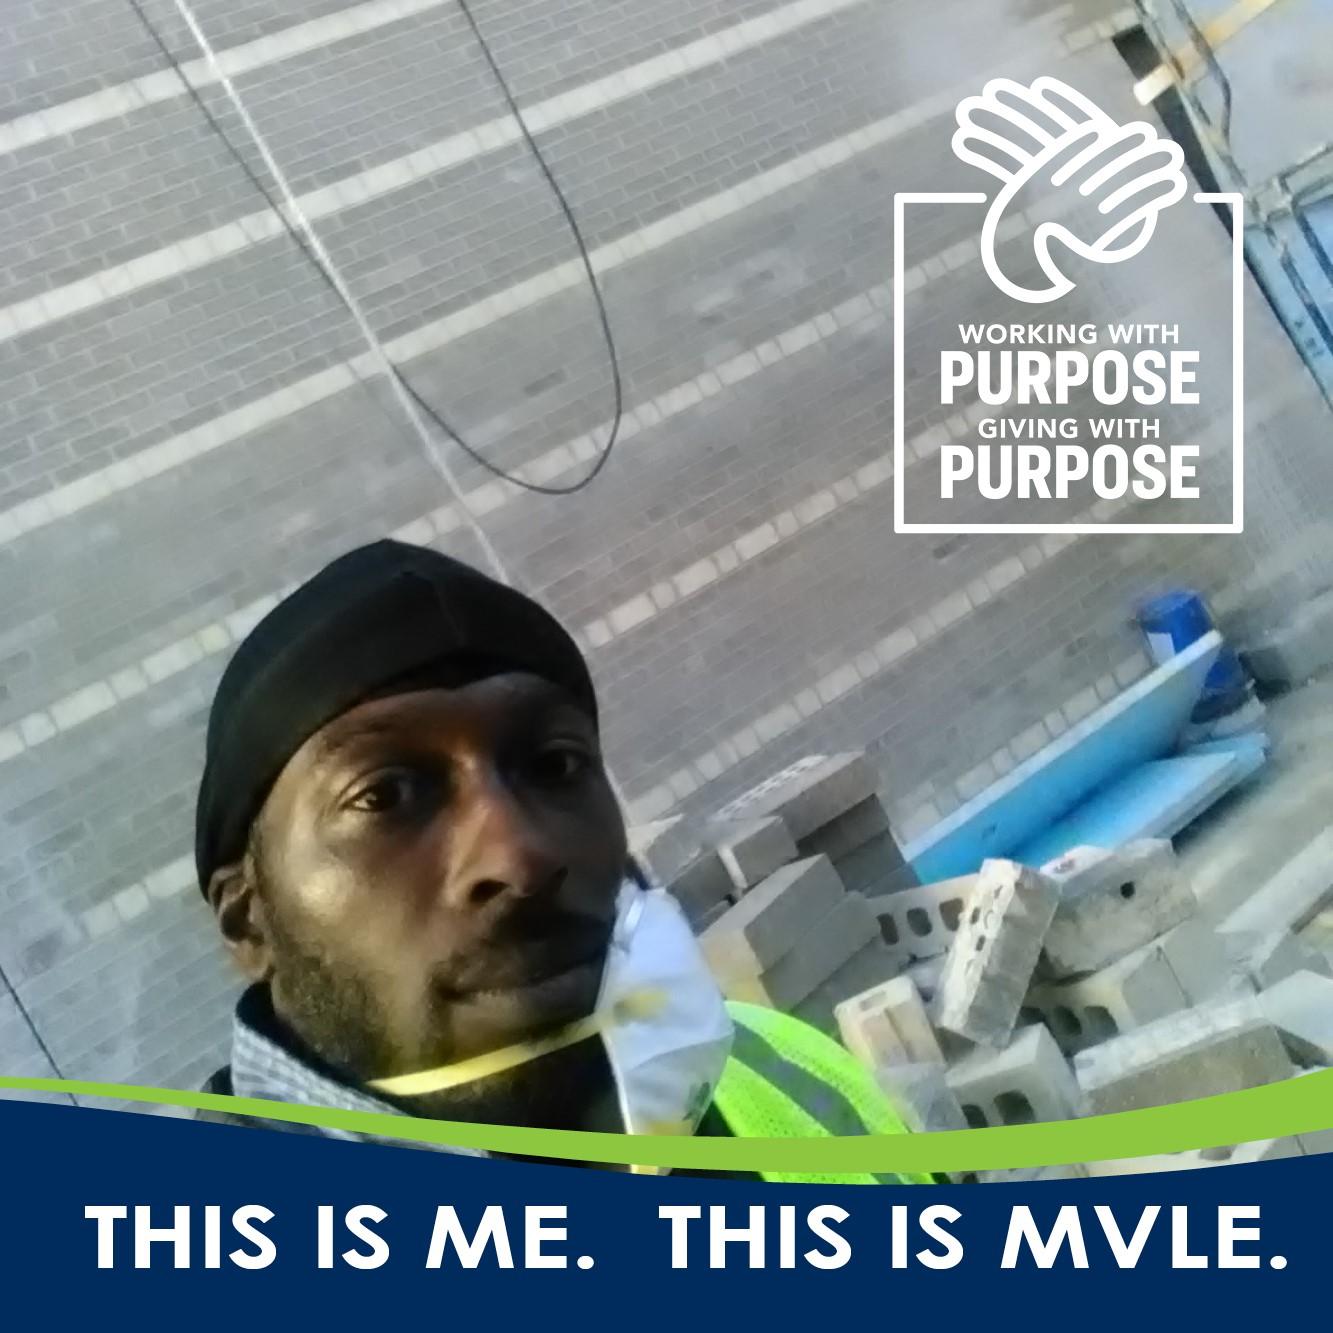 Giving with Purpose- Meet Edwin